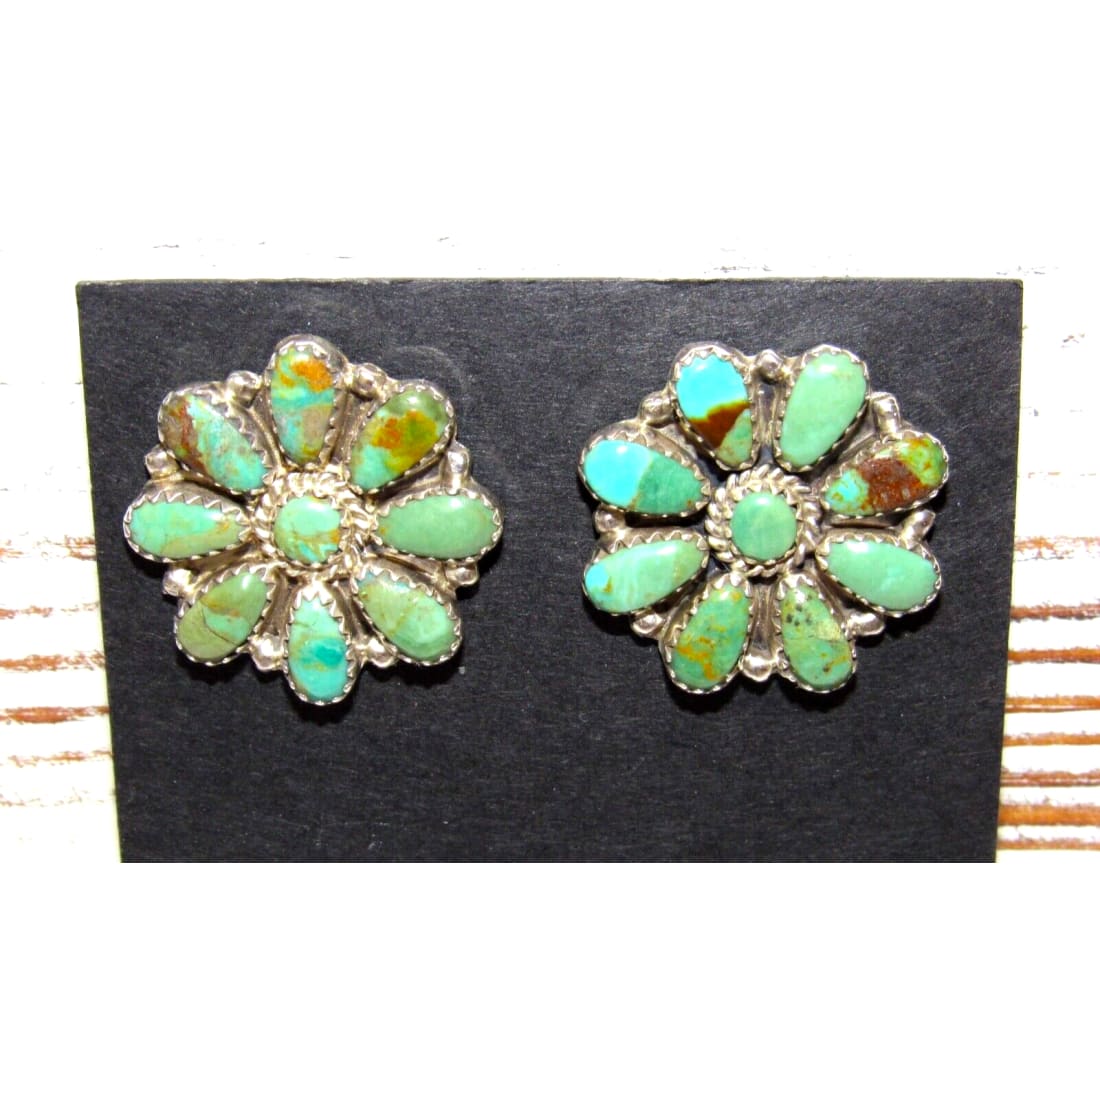 Navajo Turquoise Cluster Earrings Sterling Silver Native